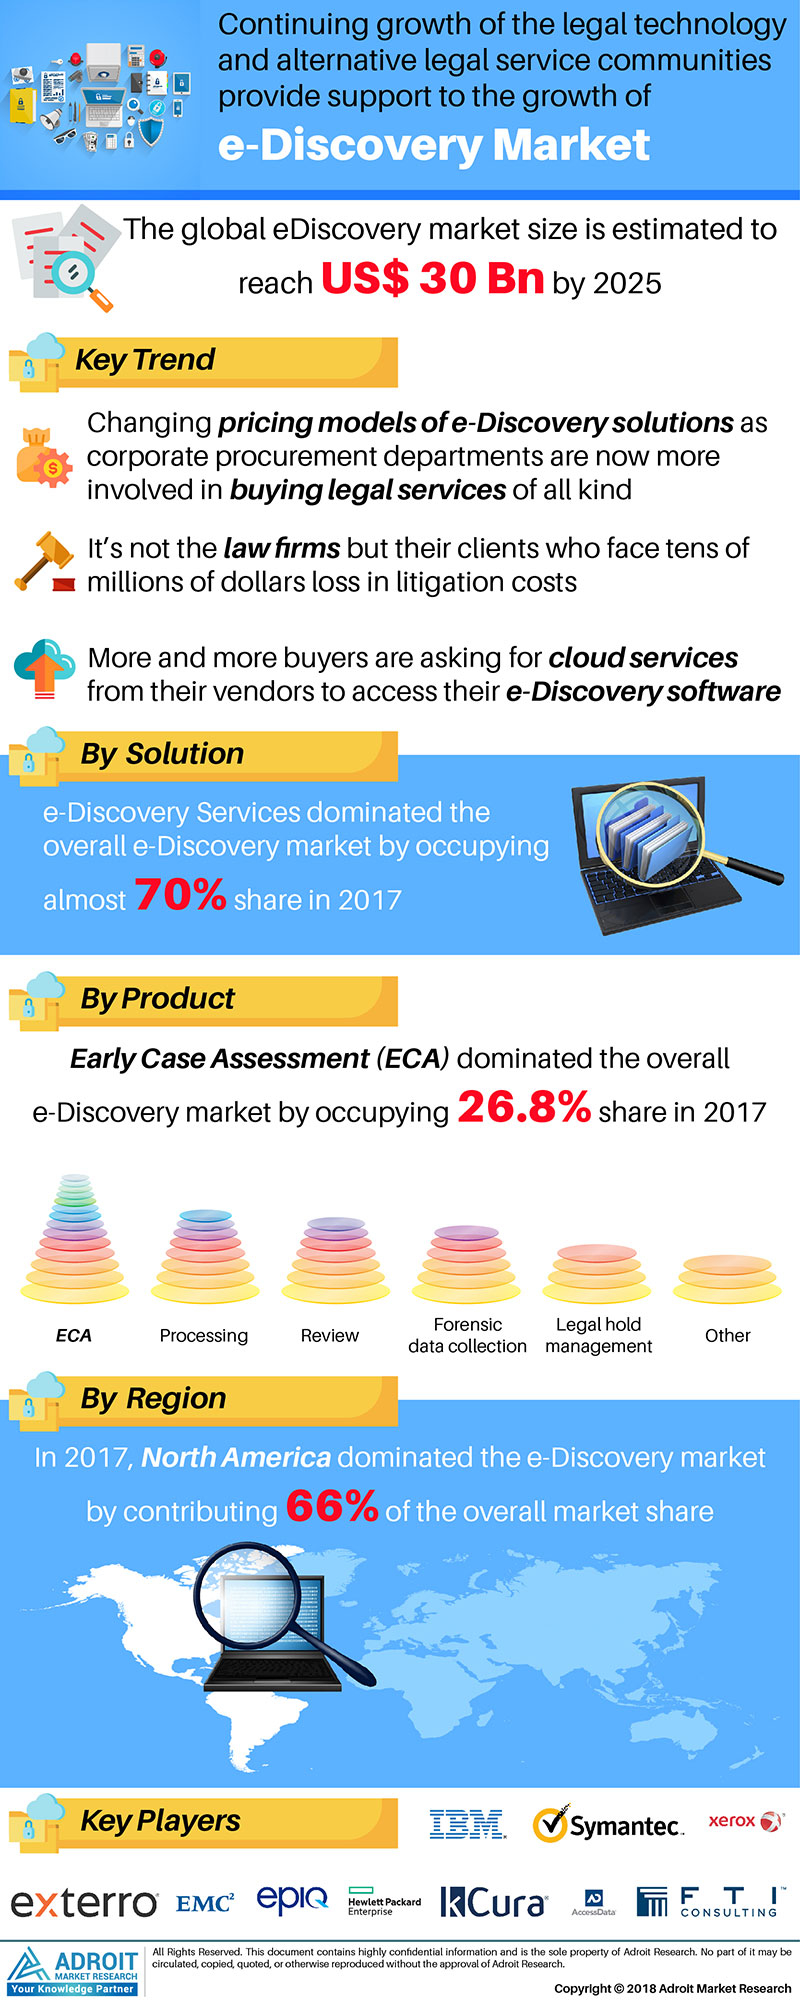 E-discovery Market Update 2018, Overview 2025 by Emerging Trends, Technology Growth, Key Functions, Applications, Regional Demand and Top Companies Analysis 7